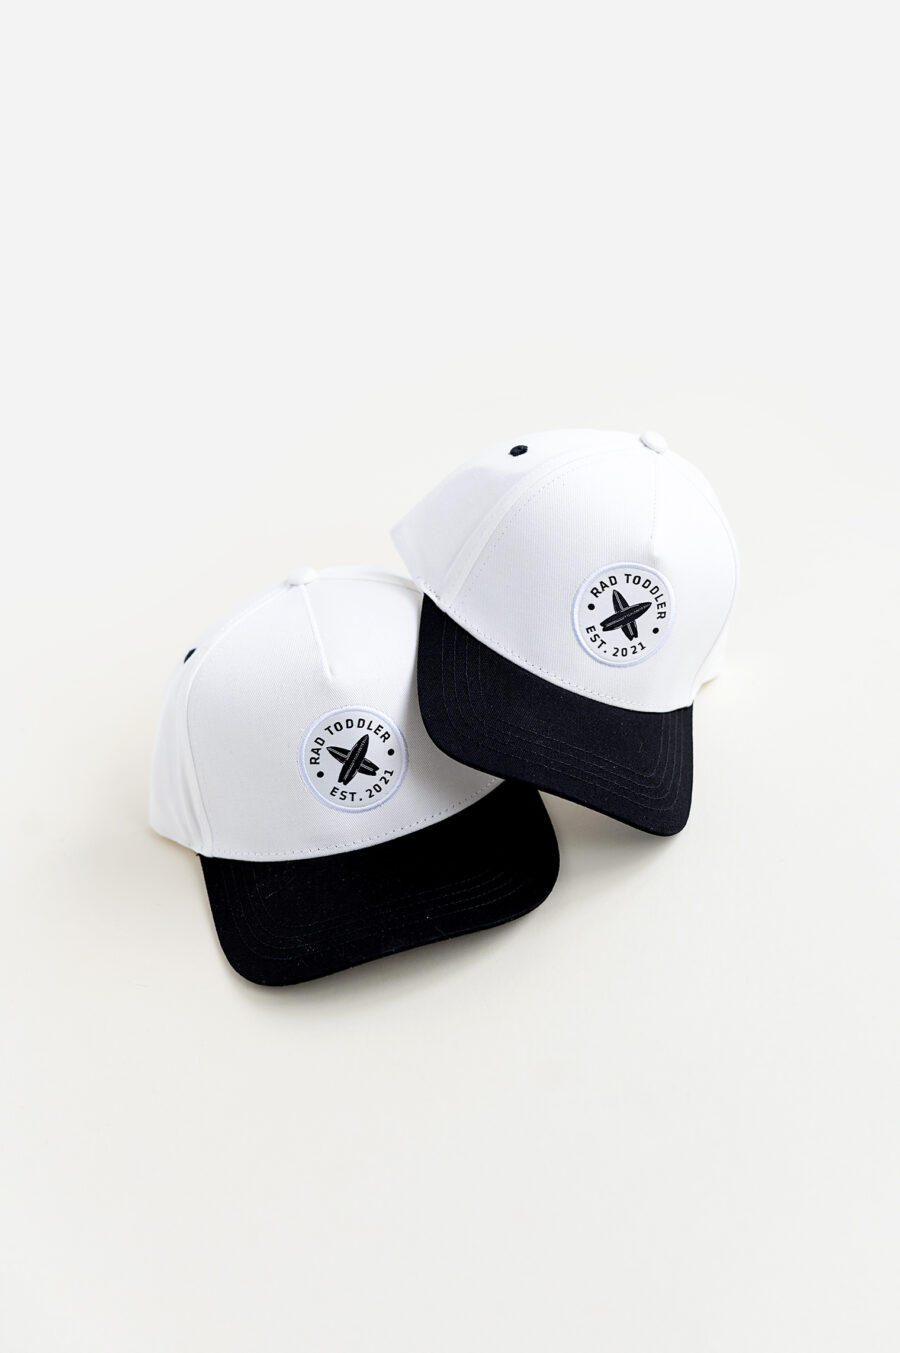 A black and white snapback by rad toddler. Comes in different sizes and looks very stylish